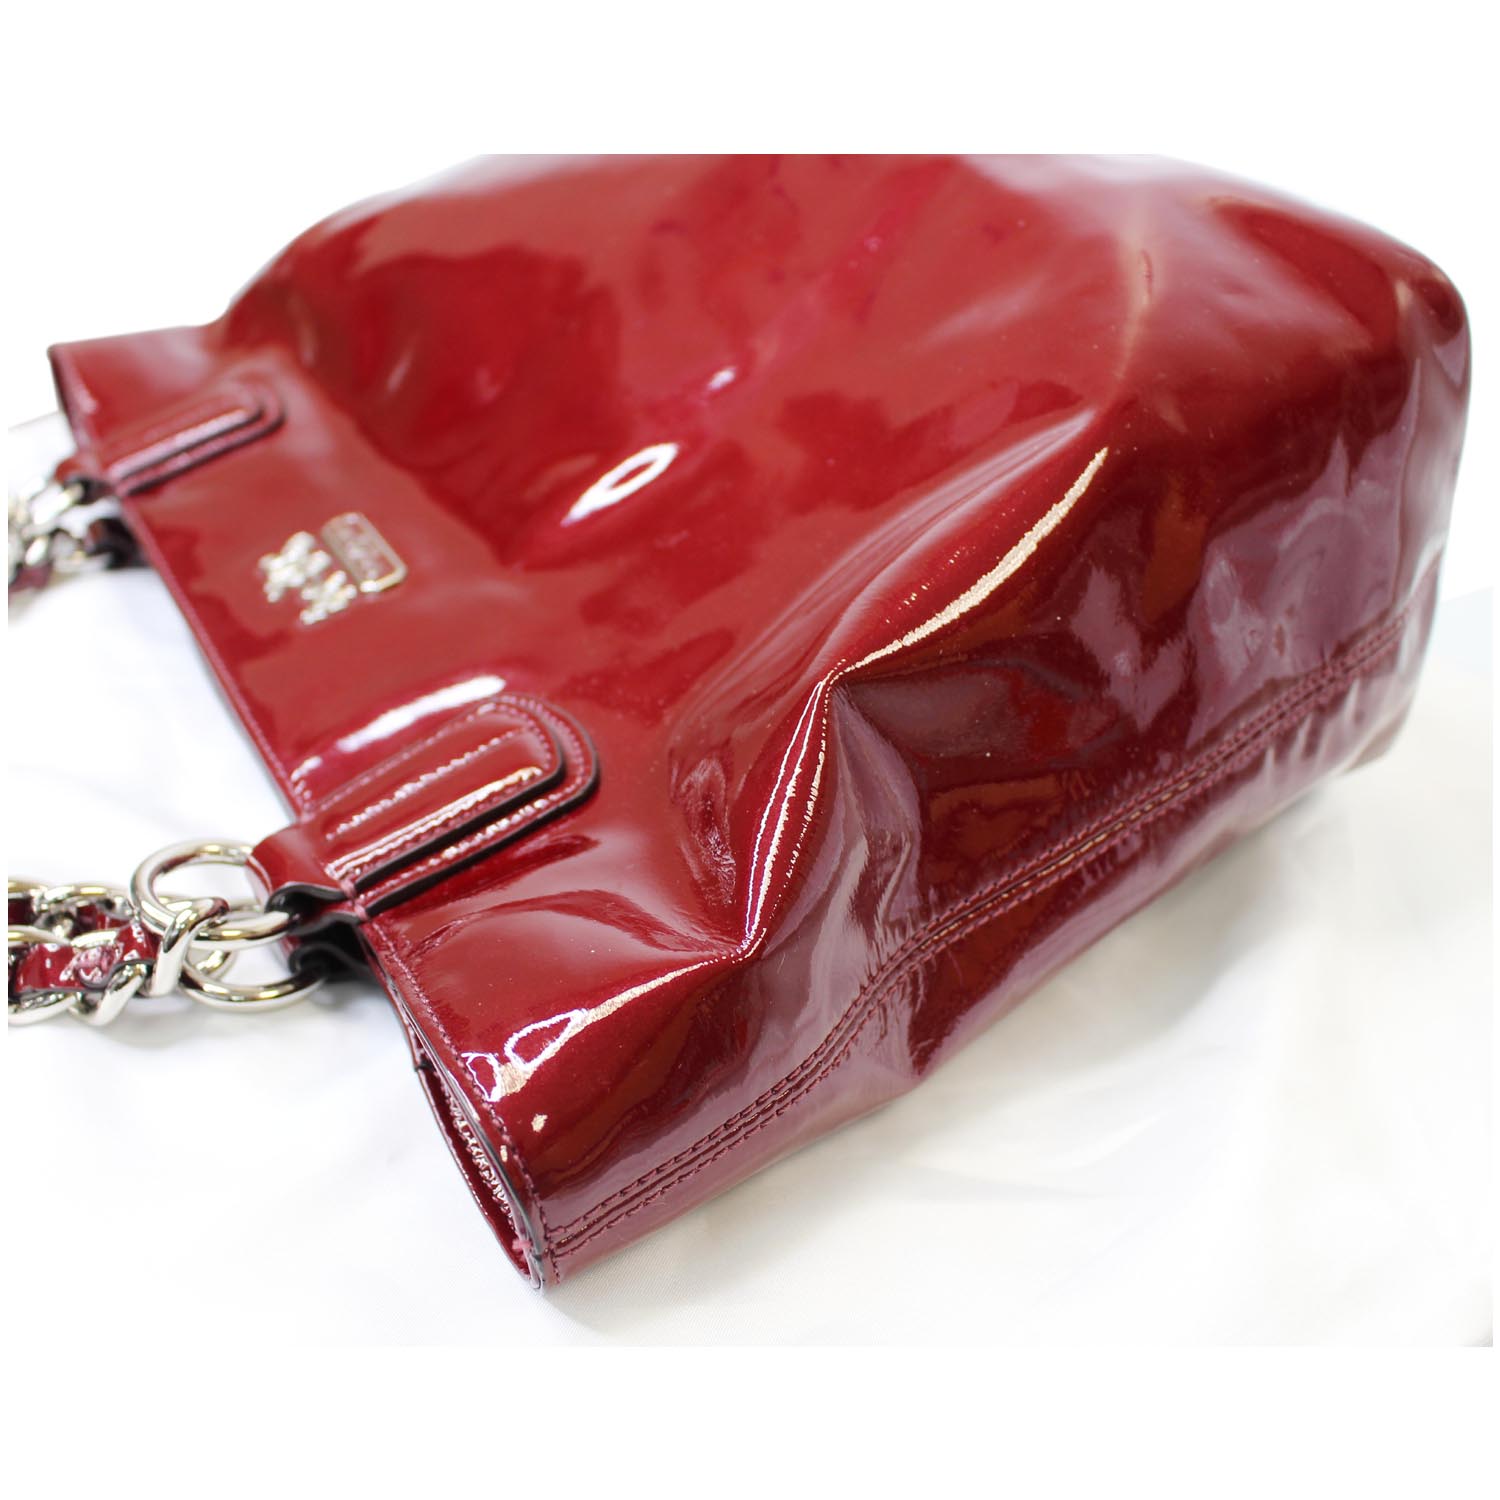 Black and Red Handbag Patent Leather Purse Small Tote Bag 